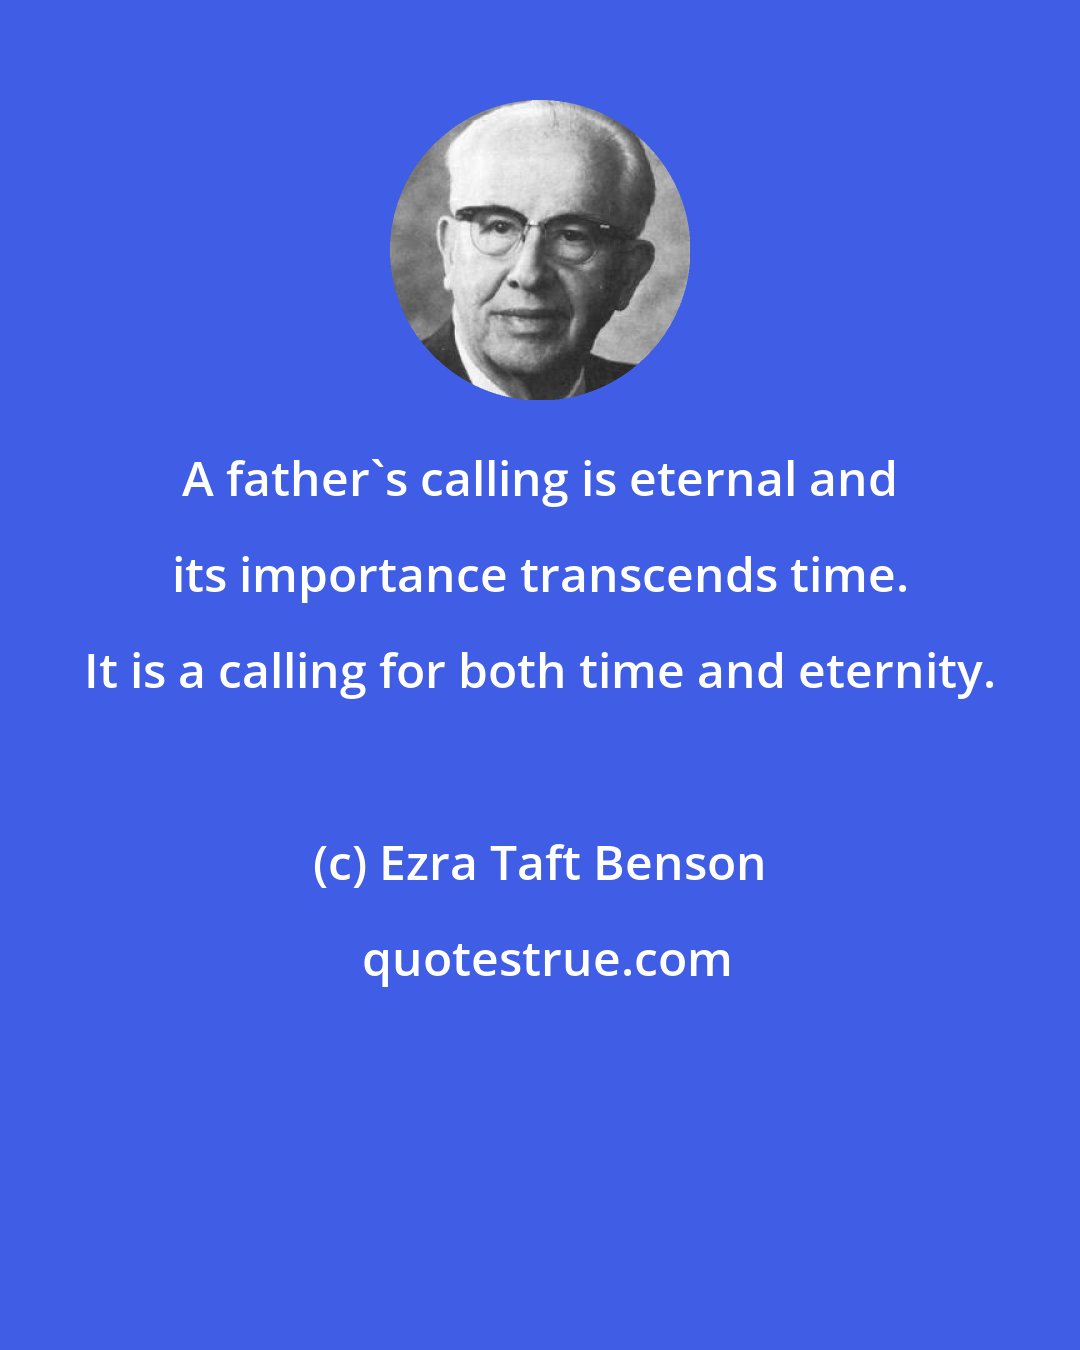 Ezra Taft Benson: A father's calling is eternal and its importance transcends time. It is a calling for both time and eternity.